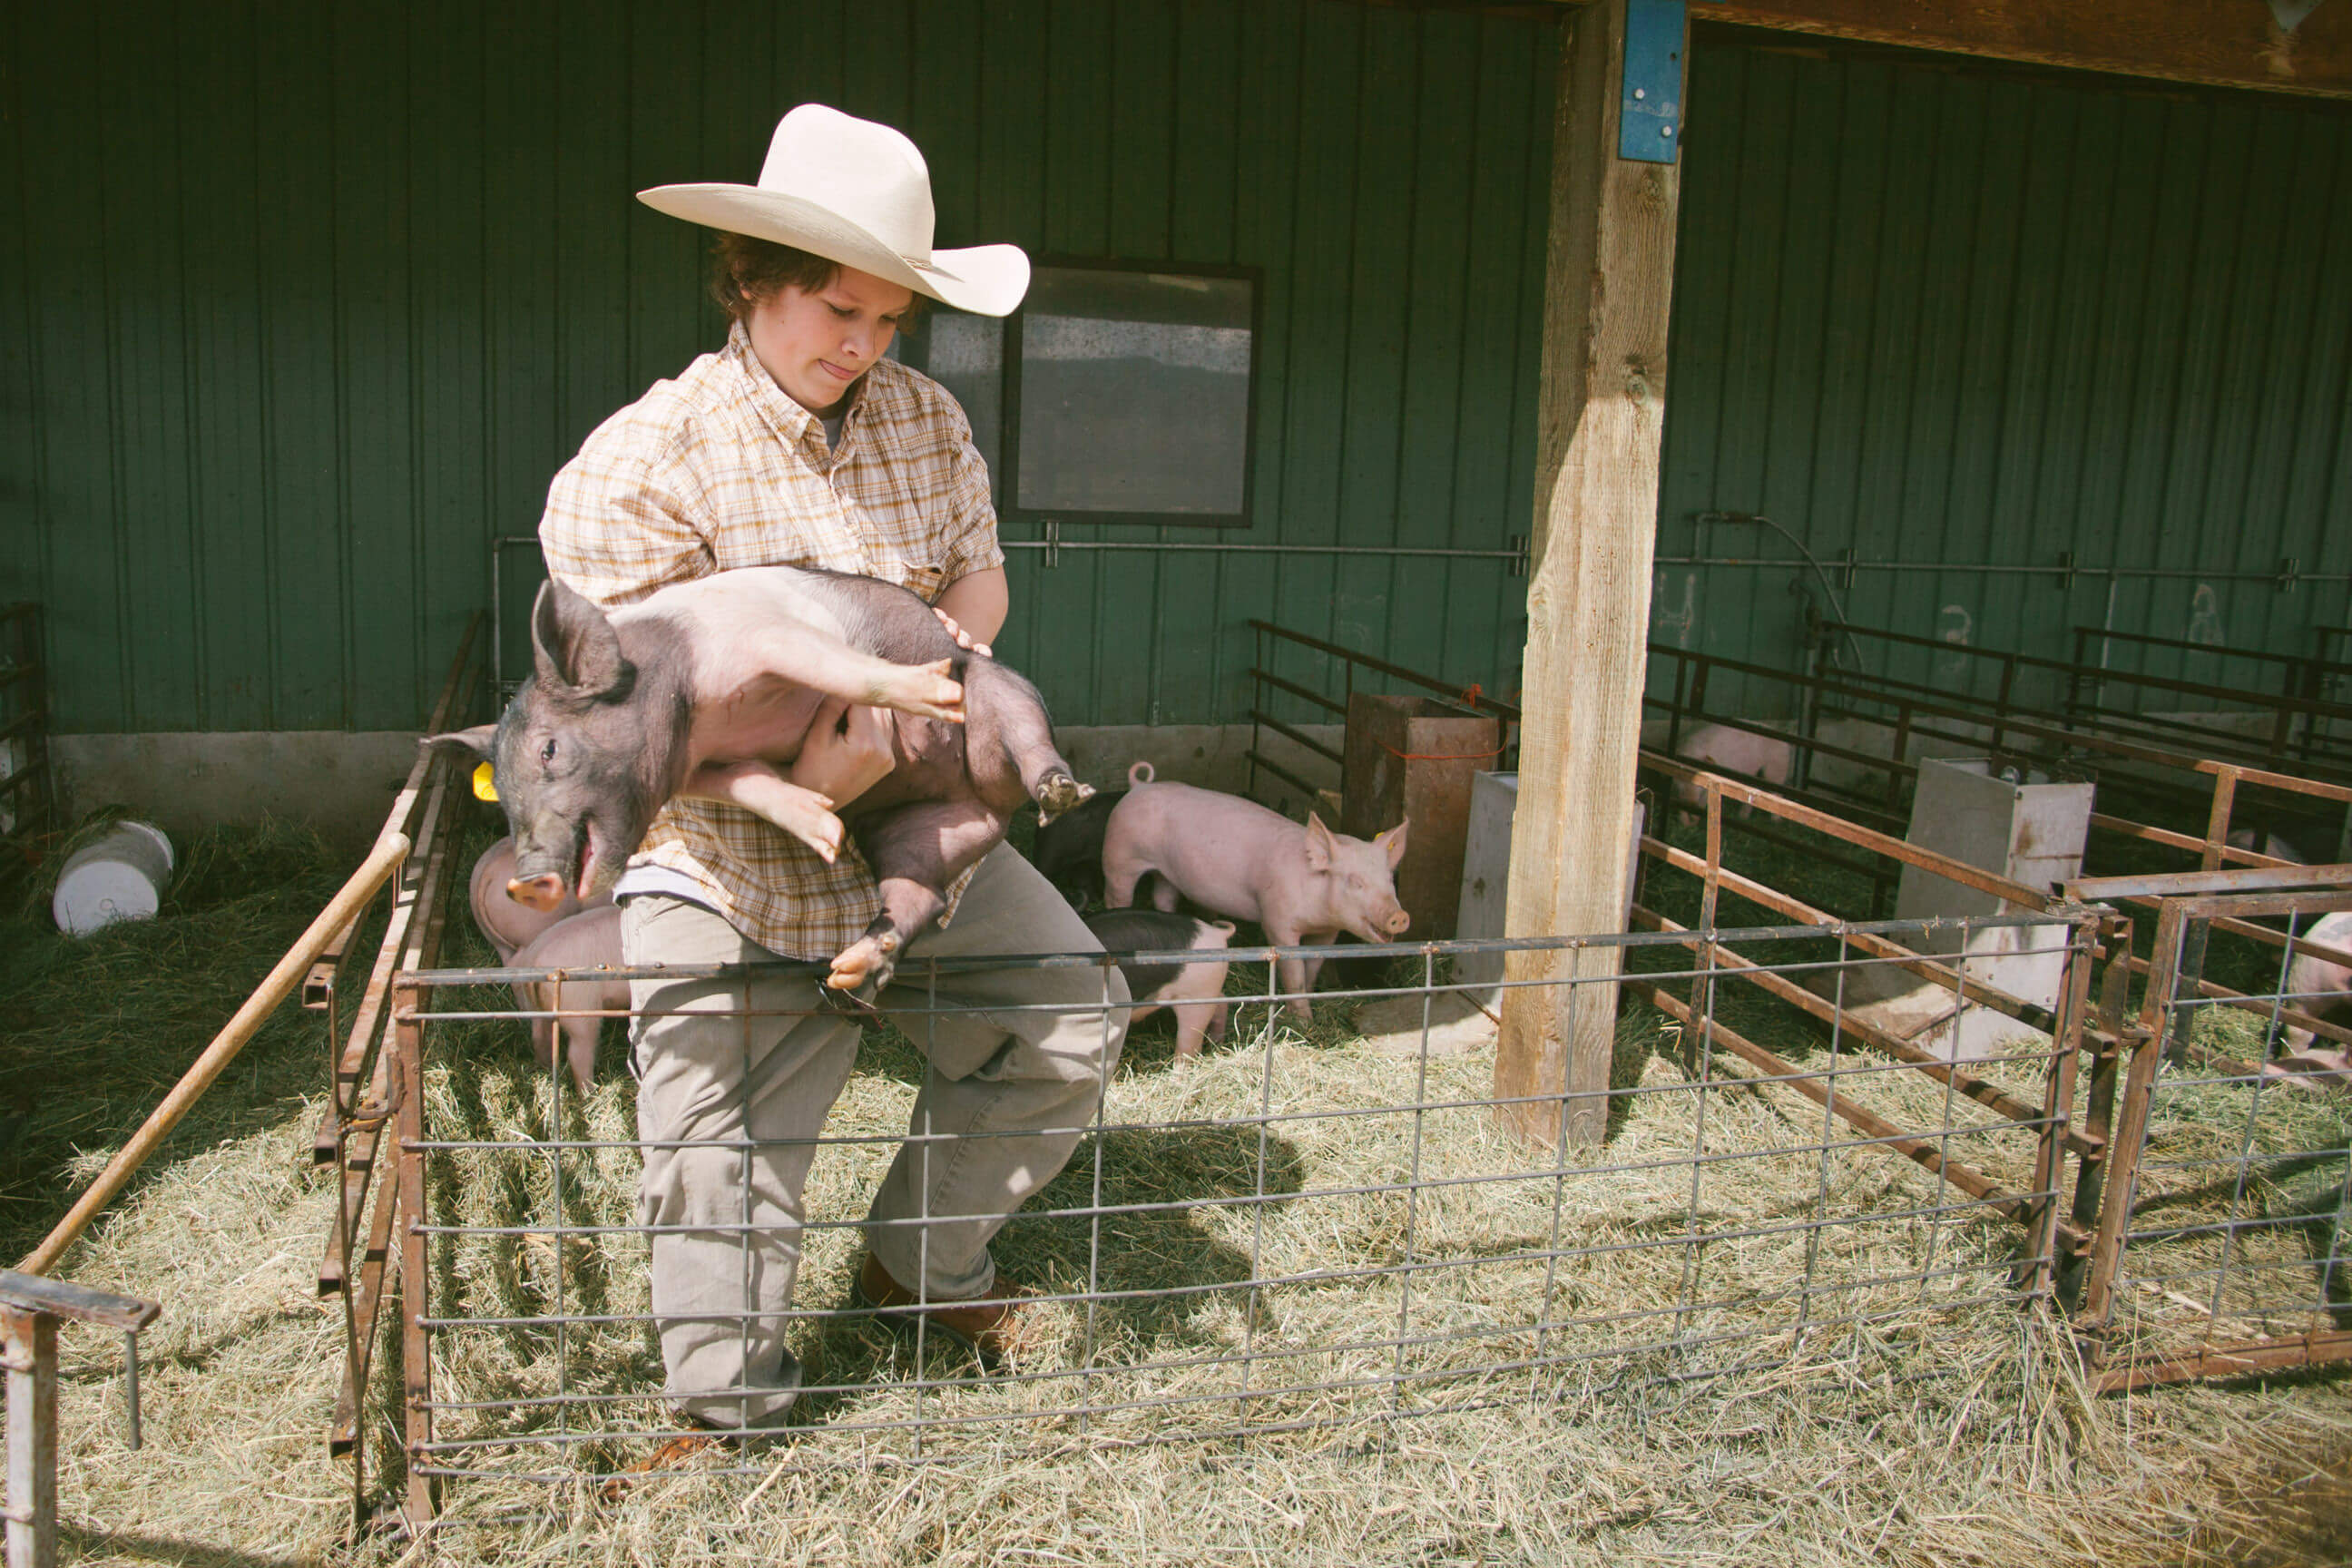 A young man removes a young piglet from its pen in Missoula Montana